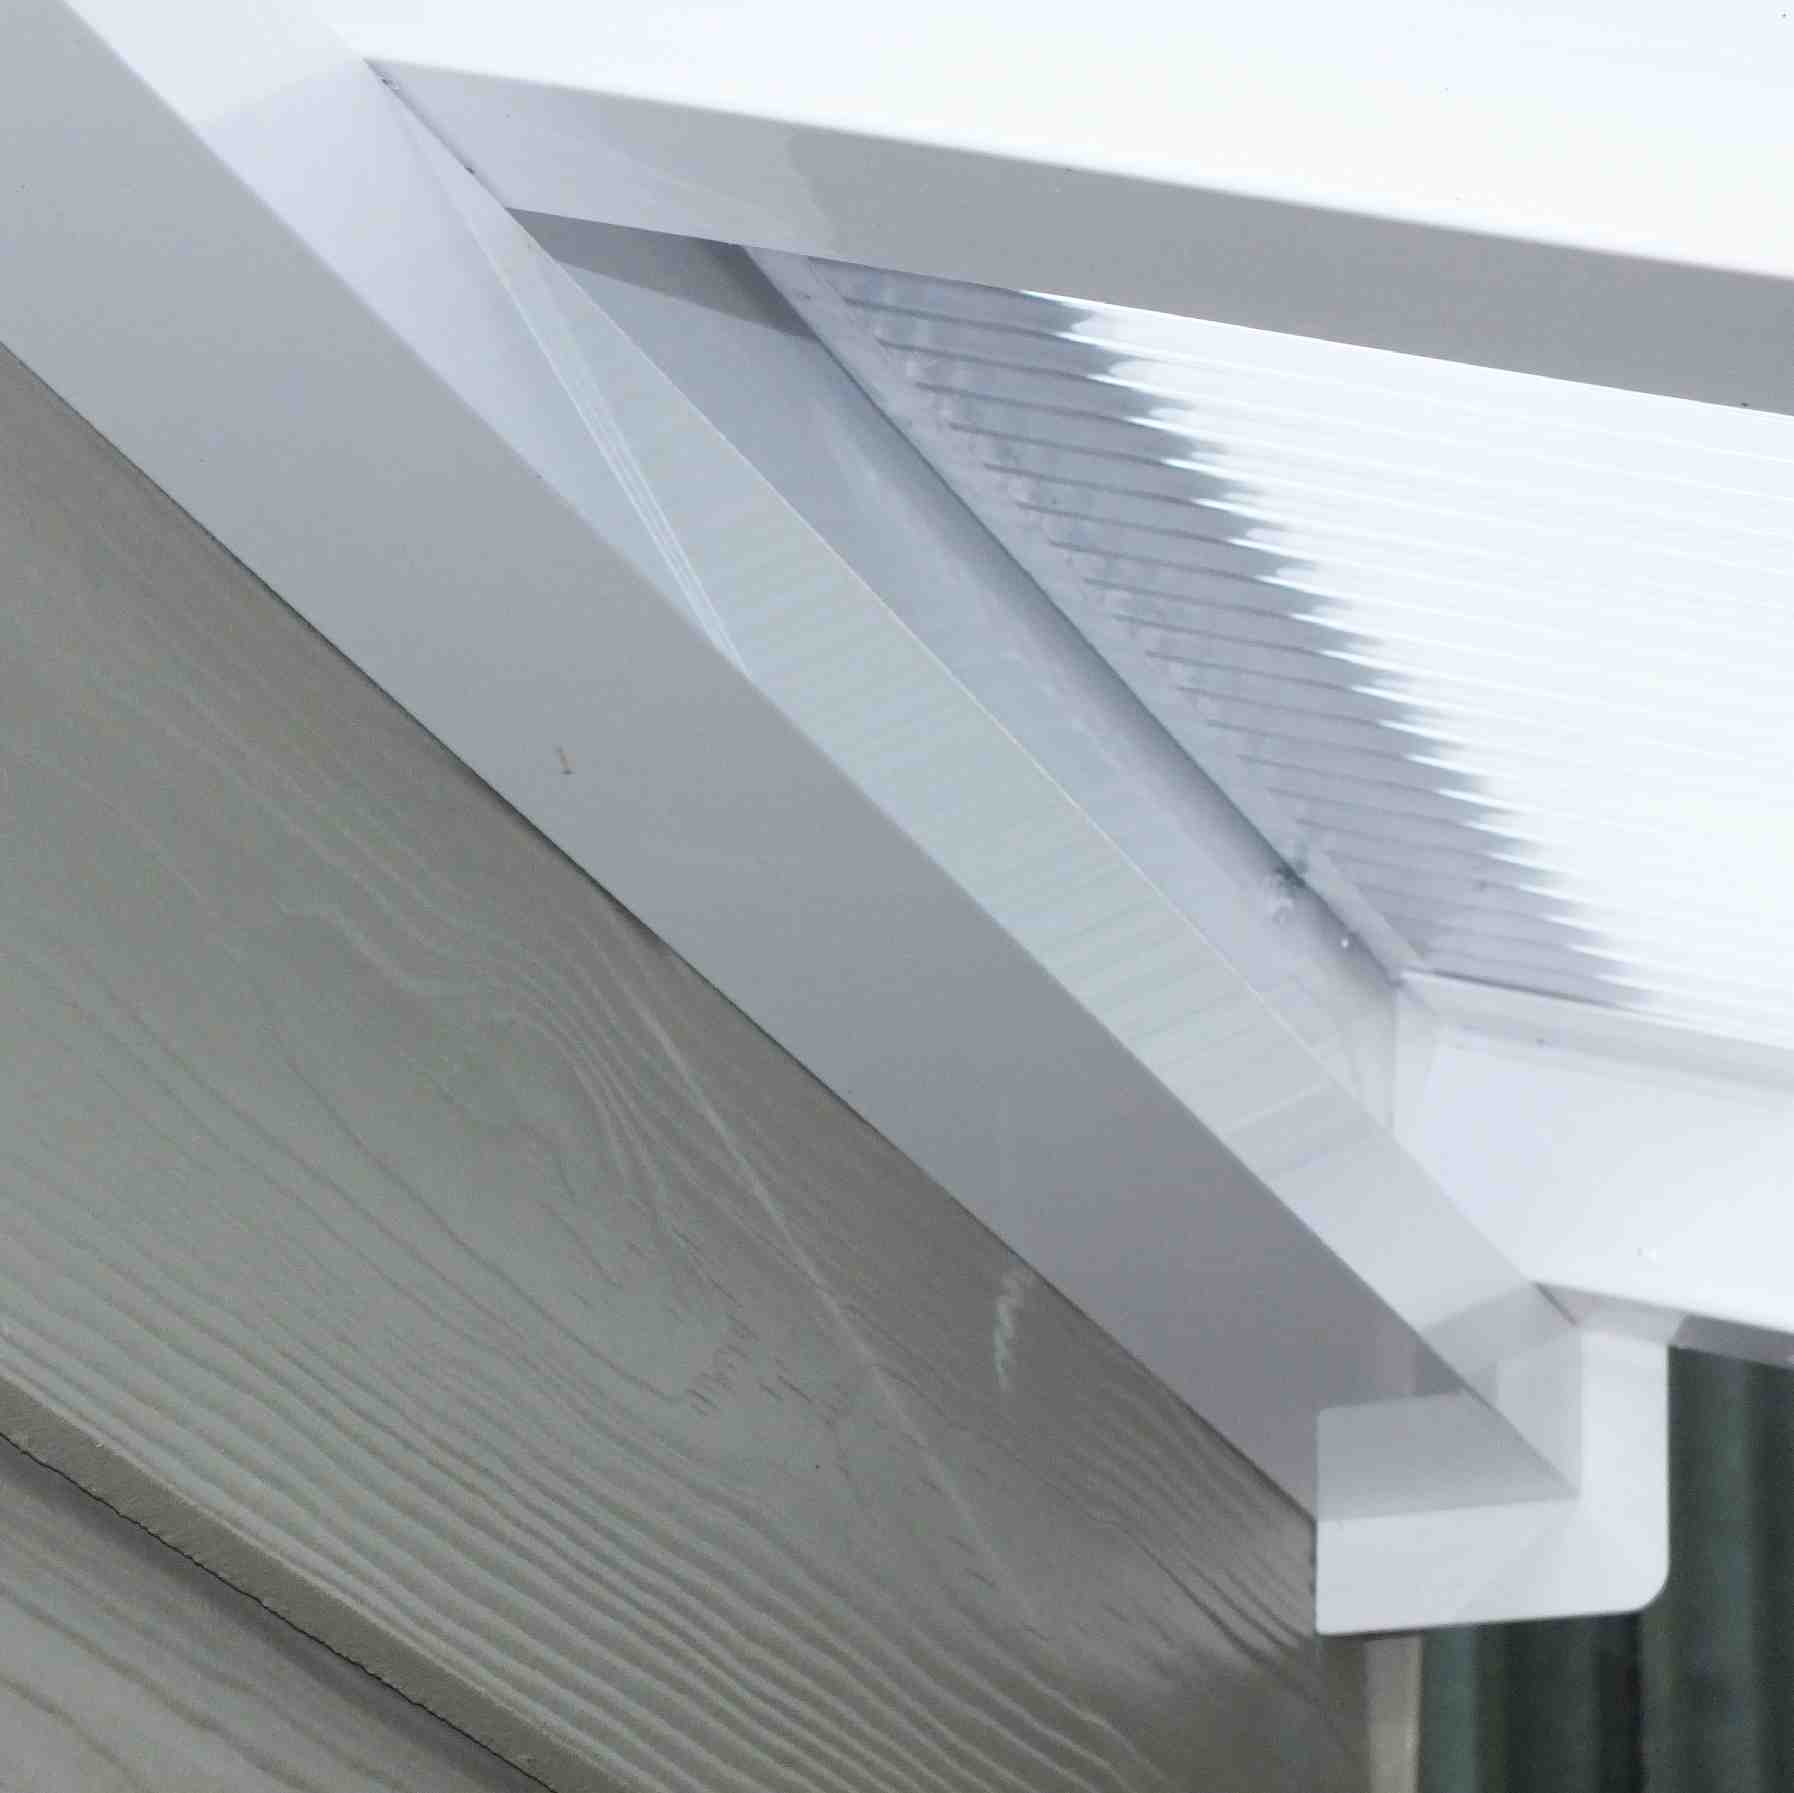 Great deals on Omega Verandah White with 16mm Polycarbonate Glazing - 8.4m (W) x 1.5m (P), (4) Supporting Posts